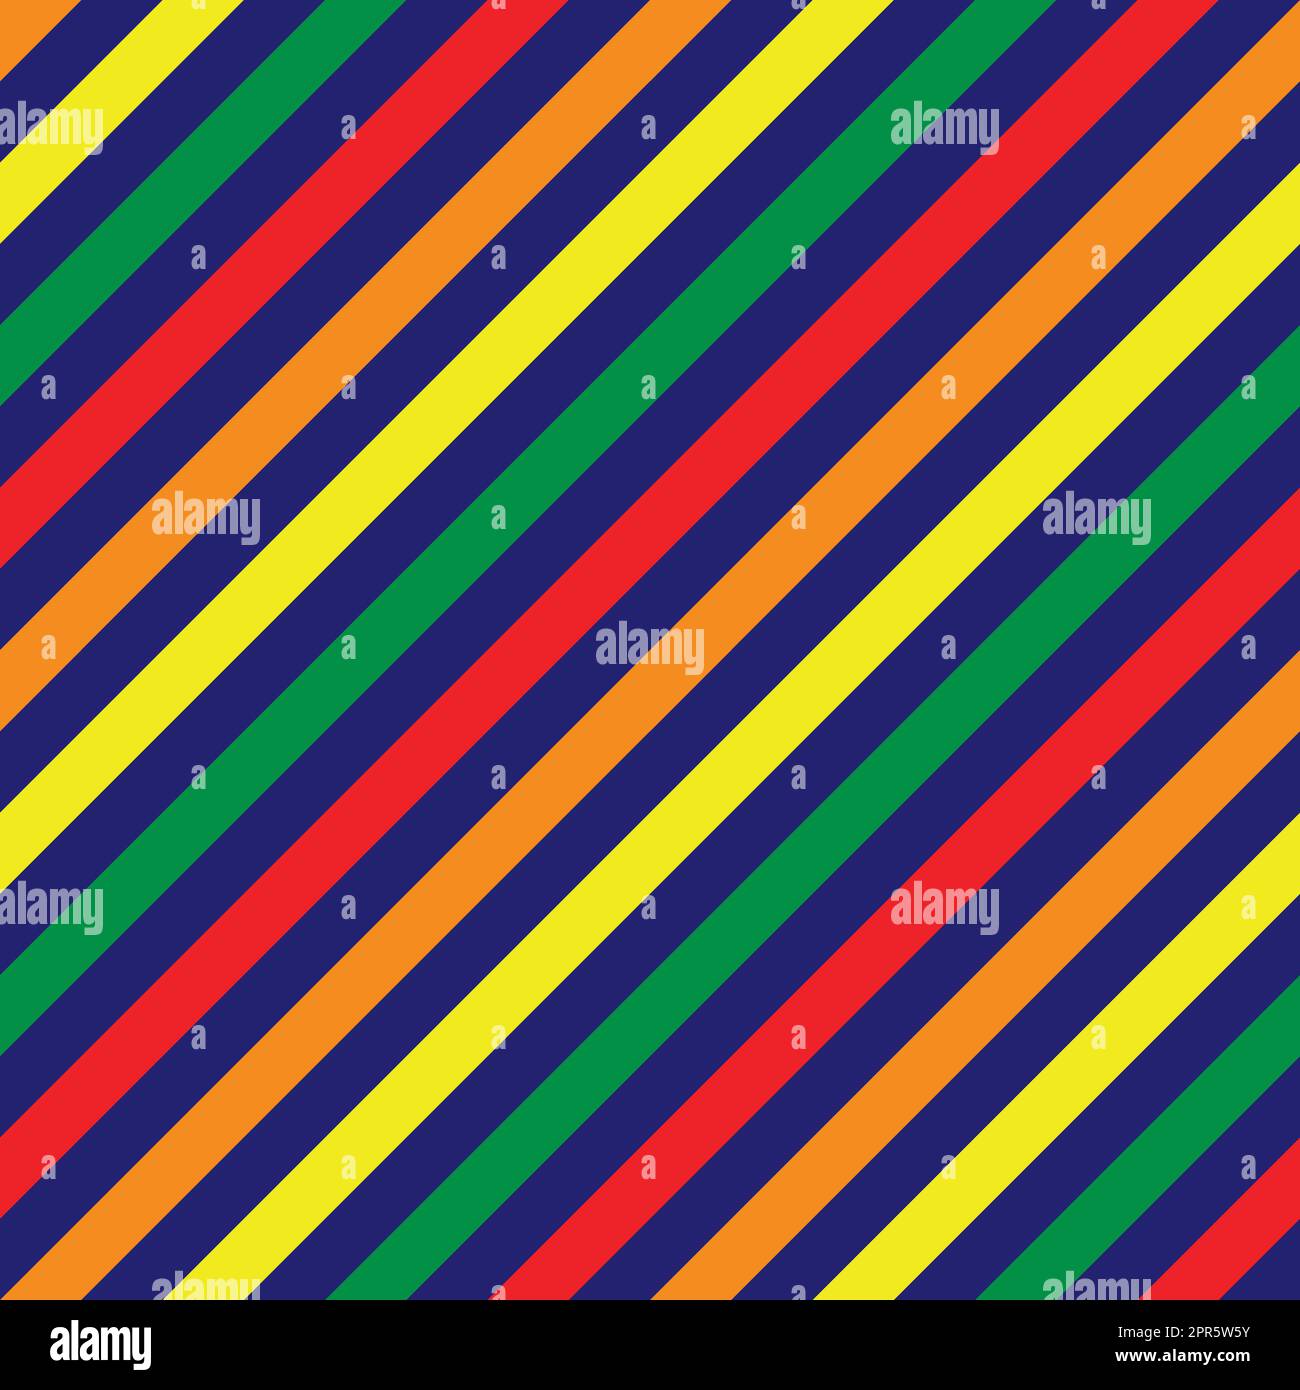 Red, Orange, Yellow and Green color strip on dark blue background. Pattern diagonal stripe seamless for graphic design, fabric, textile, fashion. Stock Photo